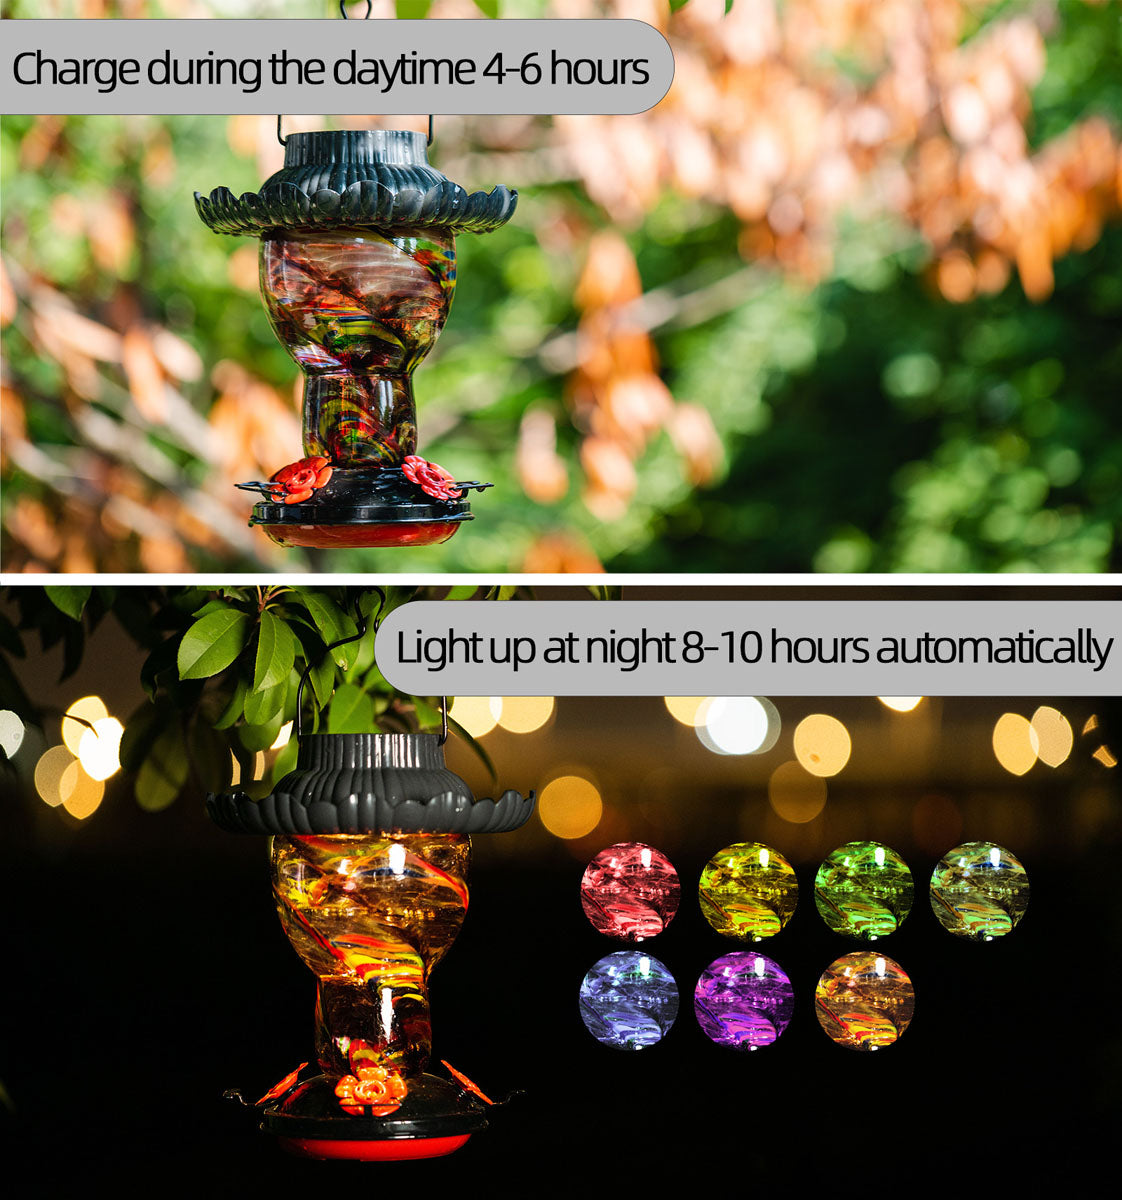 Solar Powered Hummingbird Feeder, 25oz Color Changing Hand Blown Glass Reservoir, Rave Floral